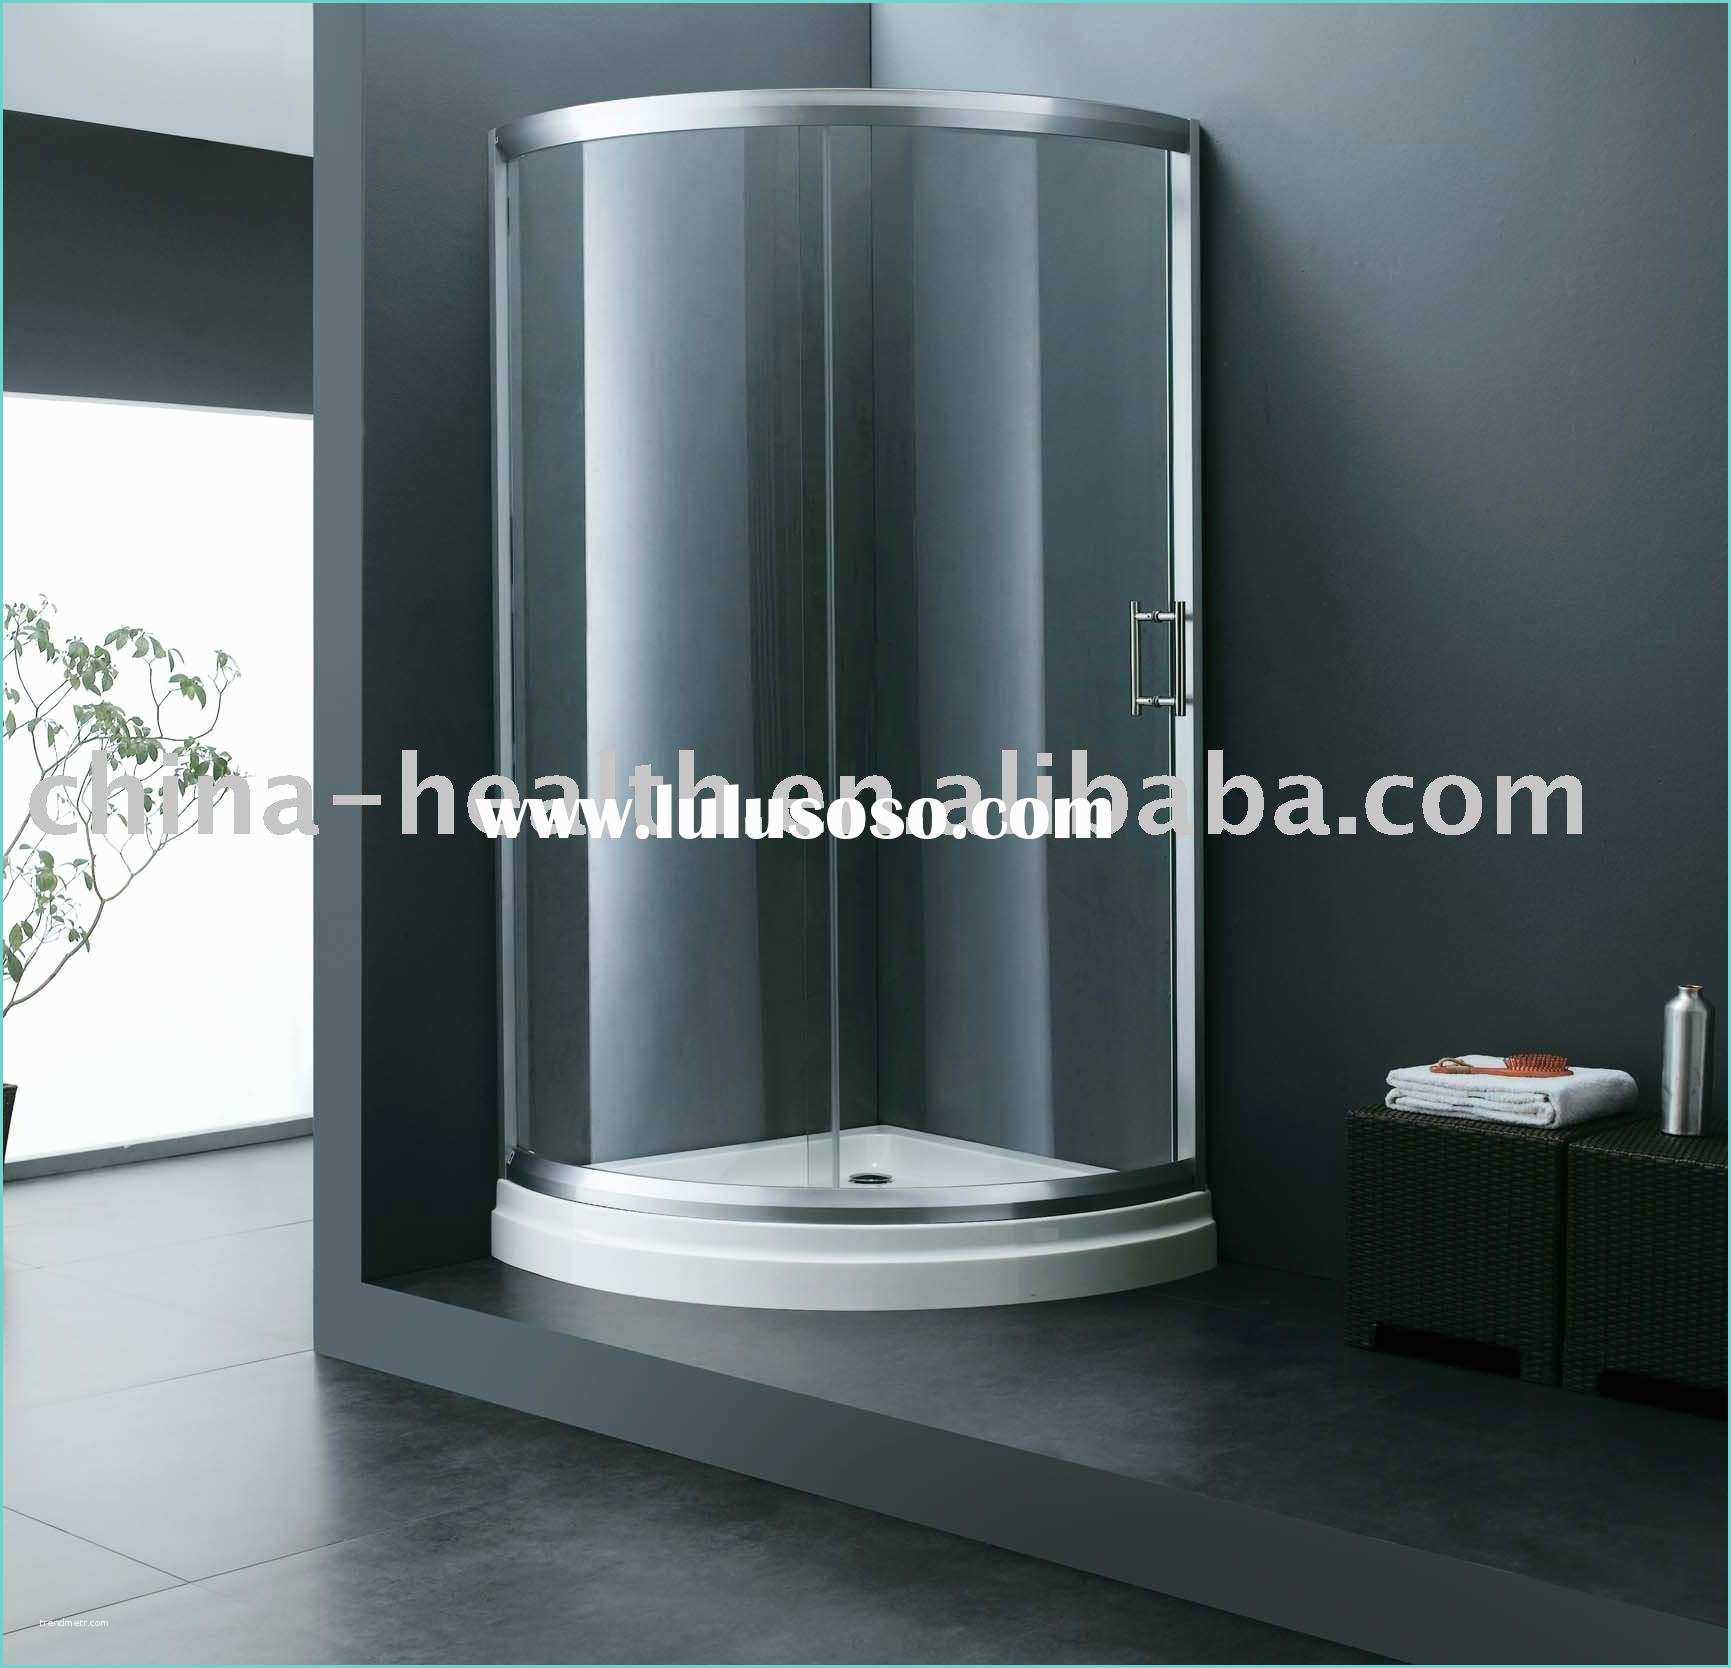 China Acrtlic Douche Steam Shower Carbin with Bathtub Suppliers 900x900 Corner Acrylic Shower Enclosure for Sale Price